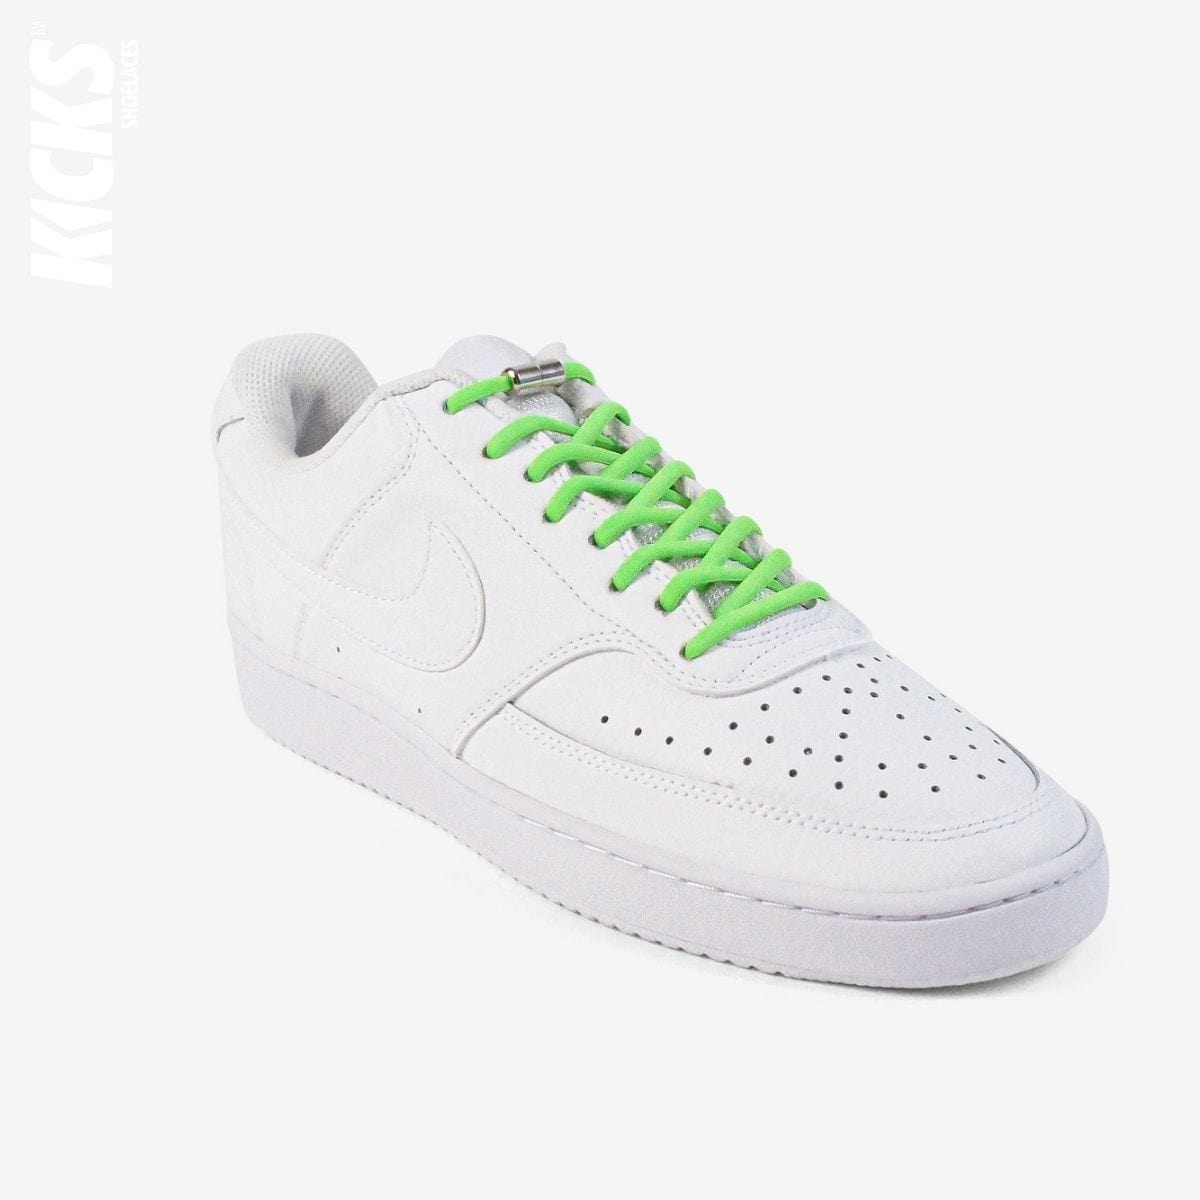 round-no-tie-shoelaces-with-bright-green-laces-on-nike-white-sneakers-by-kicks-shoelaces